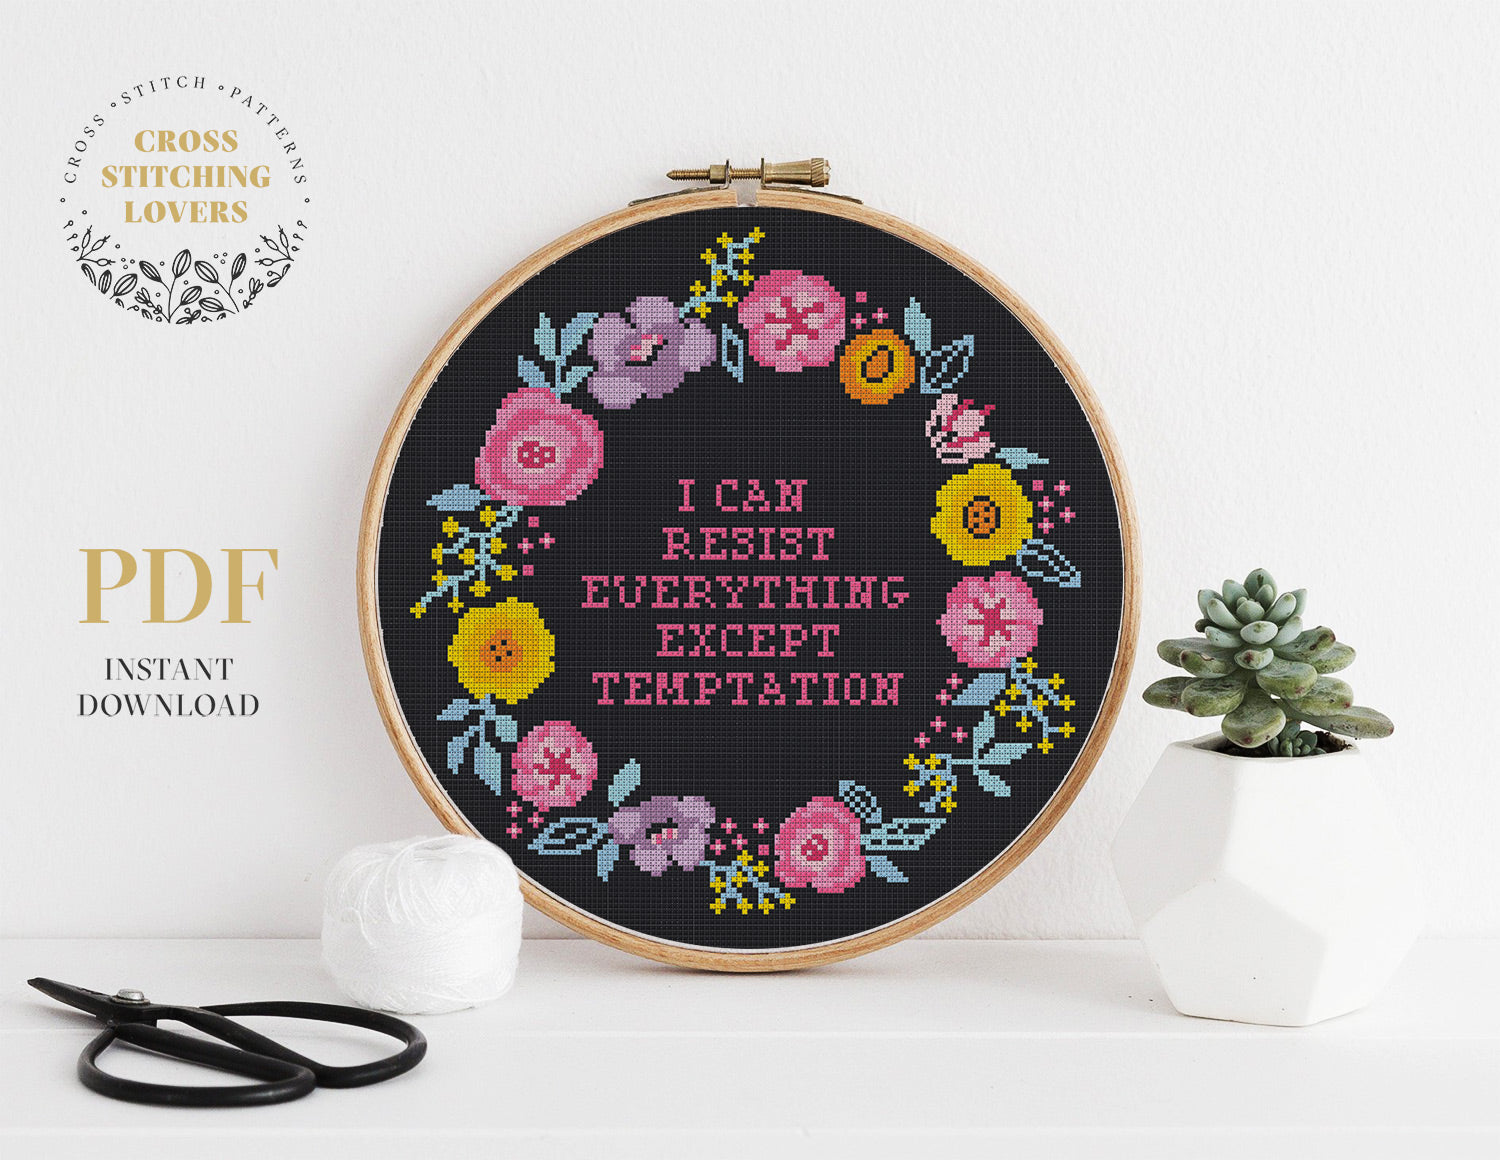 I CAN RESIST EVERYTHING - Cross stitch pattern